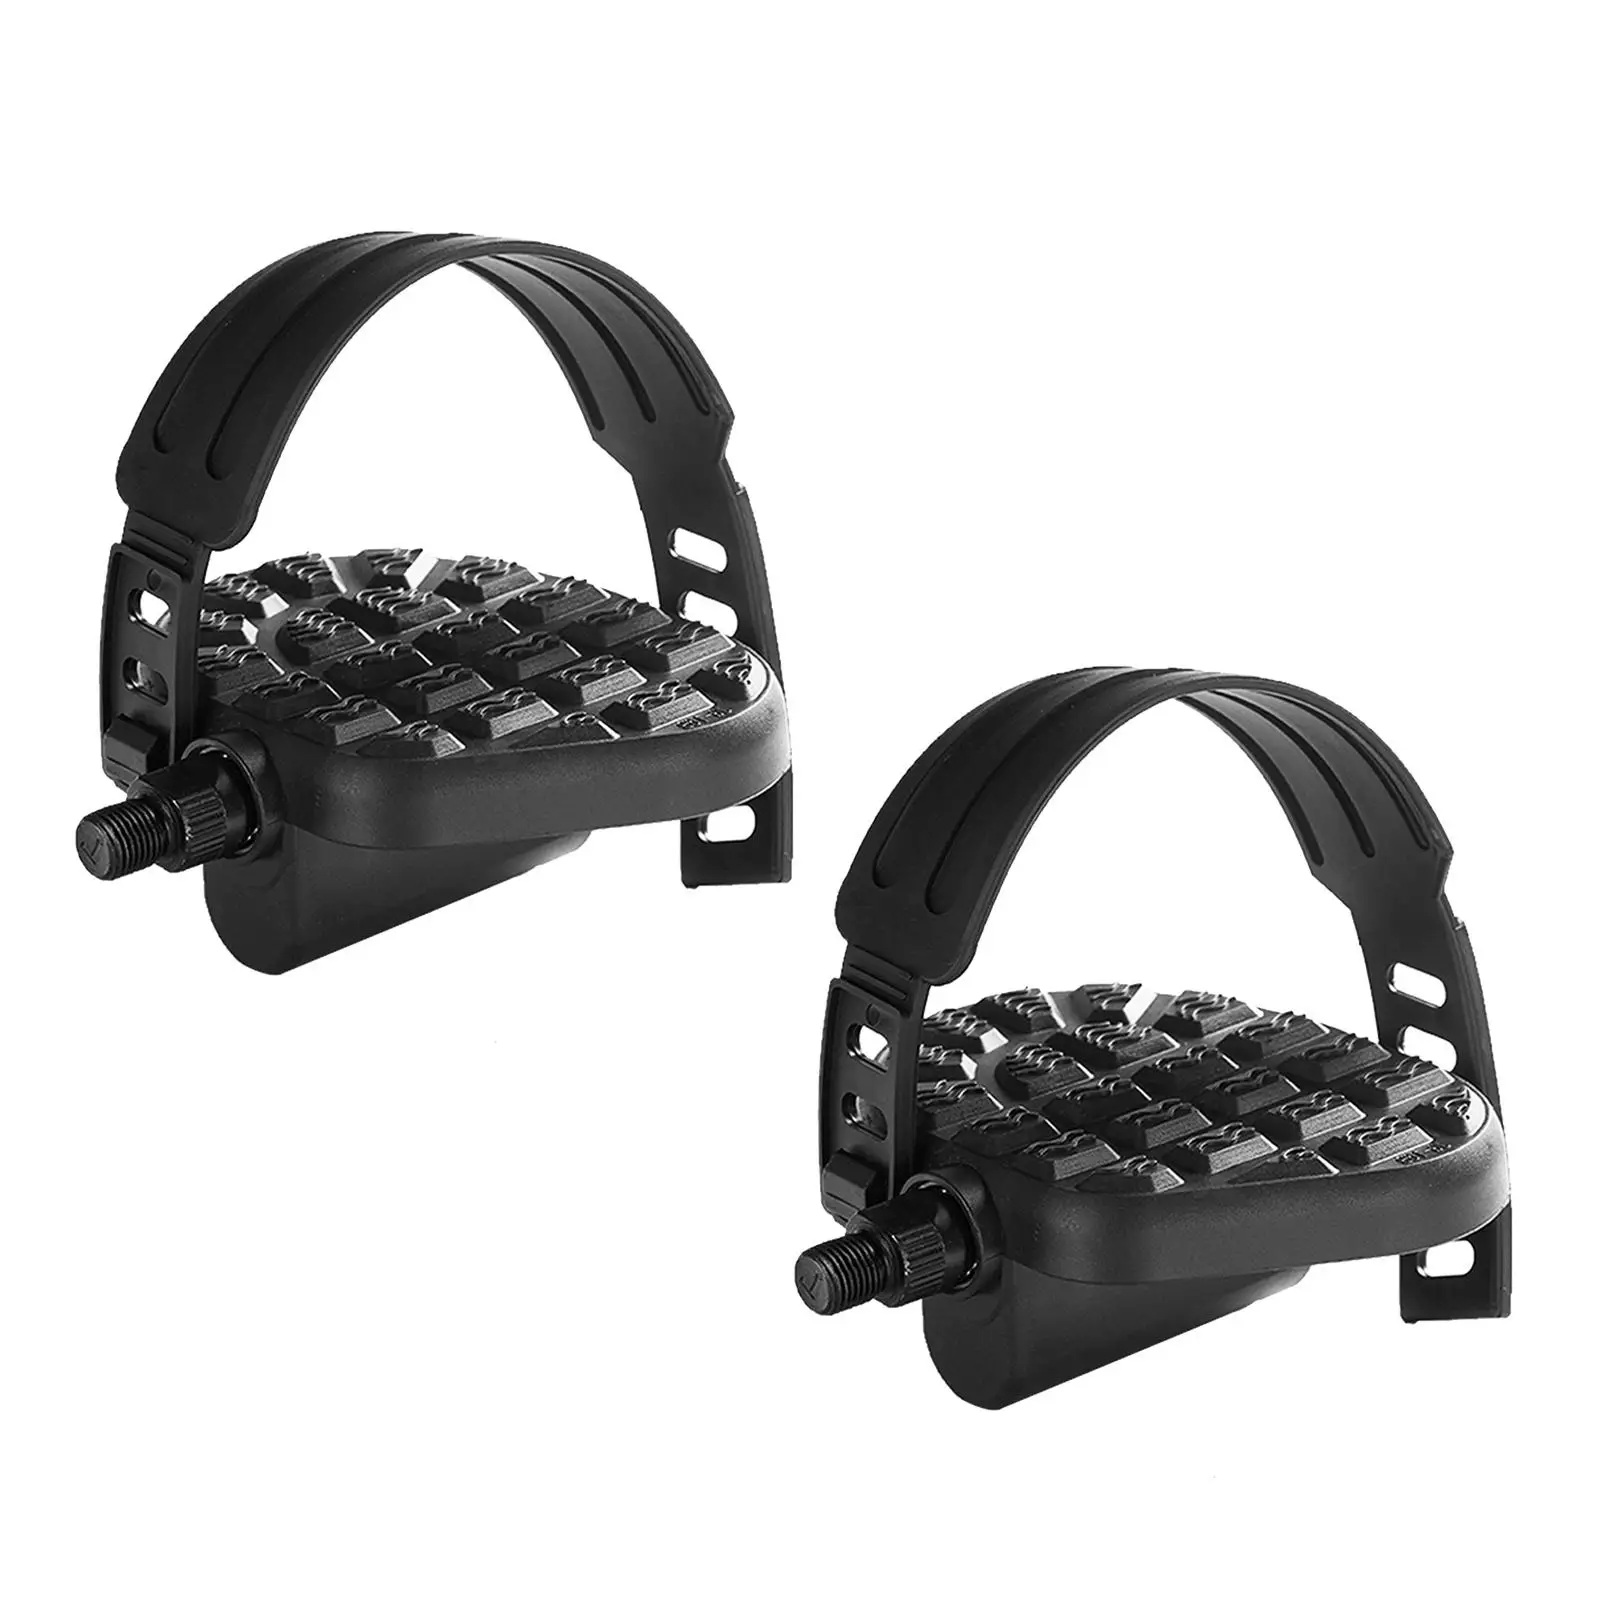 1 Pair of Exercise Bike Pedals with Adjustable Straps Set Bicycle Cycle Home Gym Mtb Road Bike Pedals Bicycle Parts Components